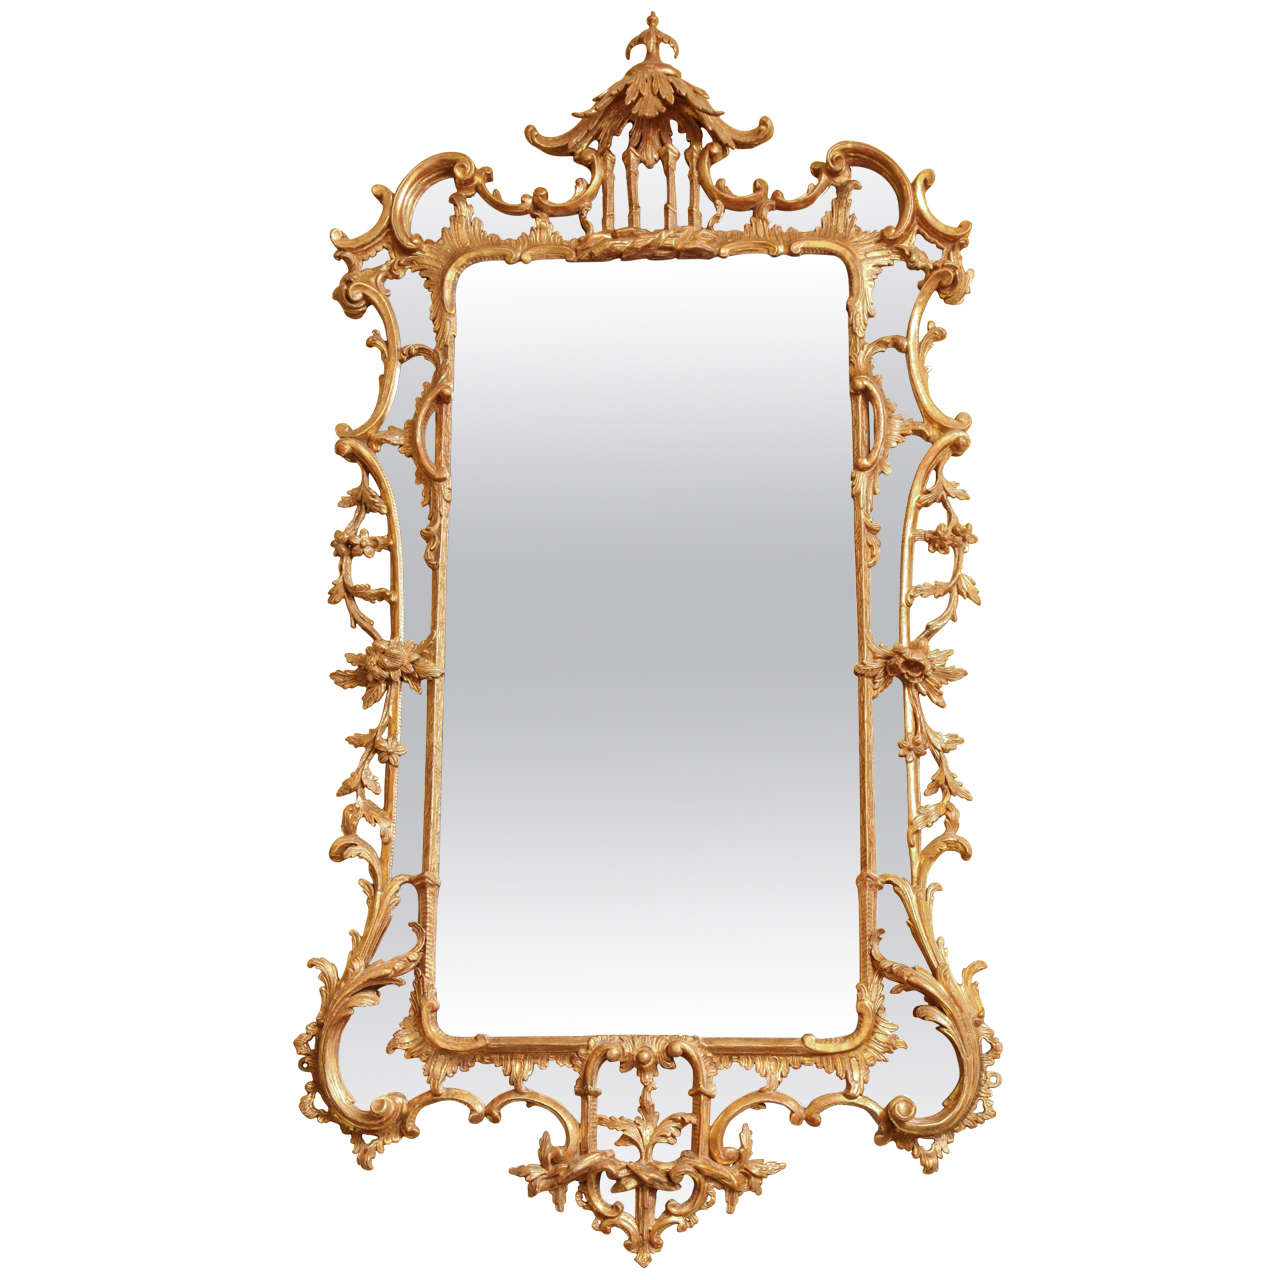 Chinese Chippendale Carved and Giltwood Border Glass Mirror, English c.1755